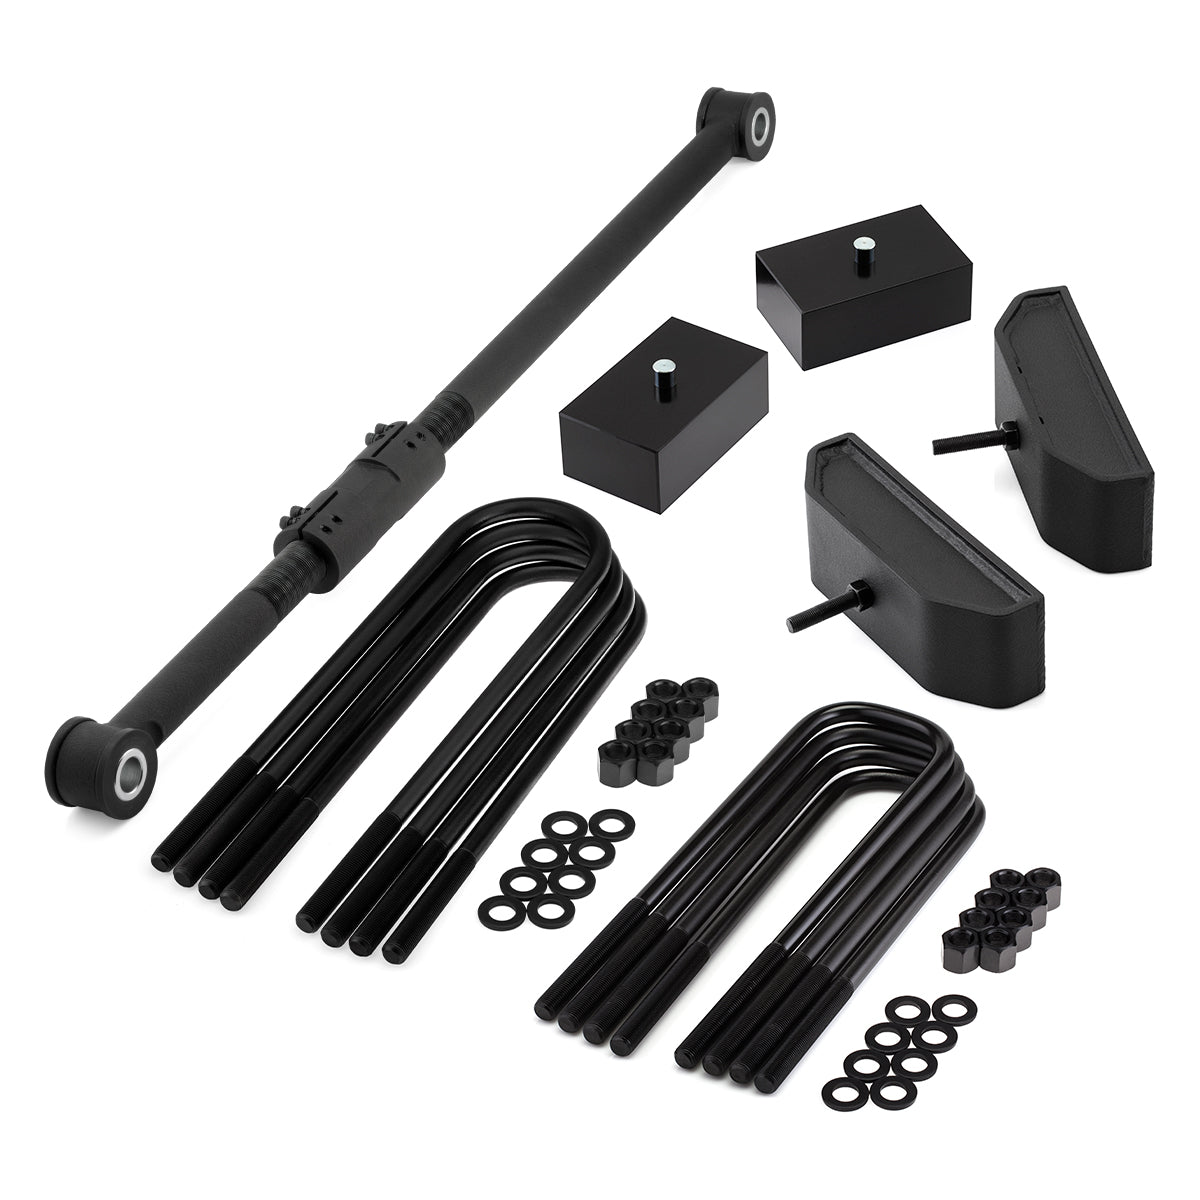 2000-2004 Ford Excursion 4WD Full Suspension Lift Kit with Adjustable Track Bar